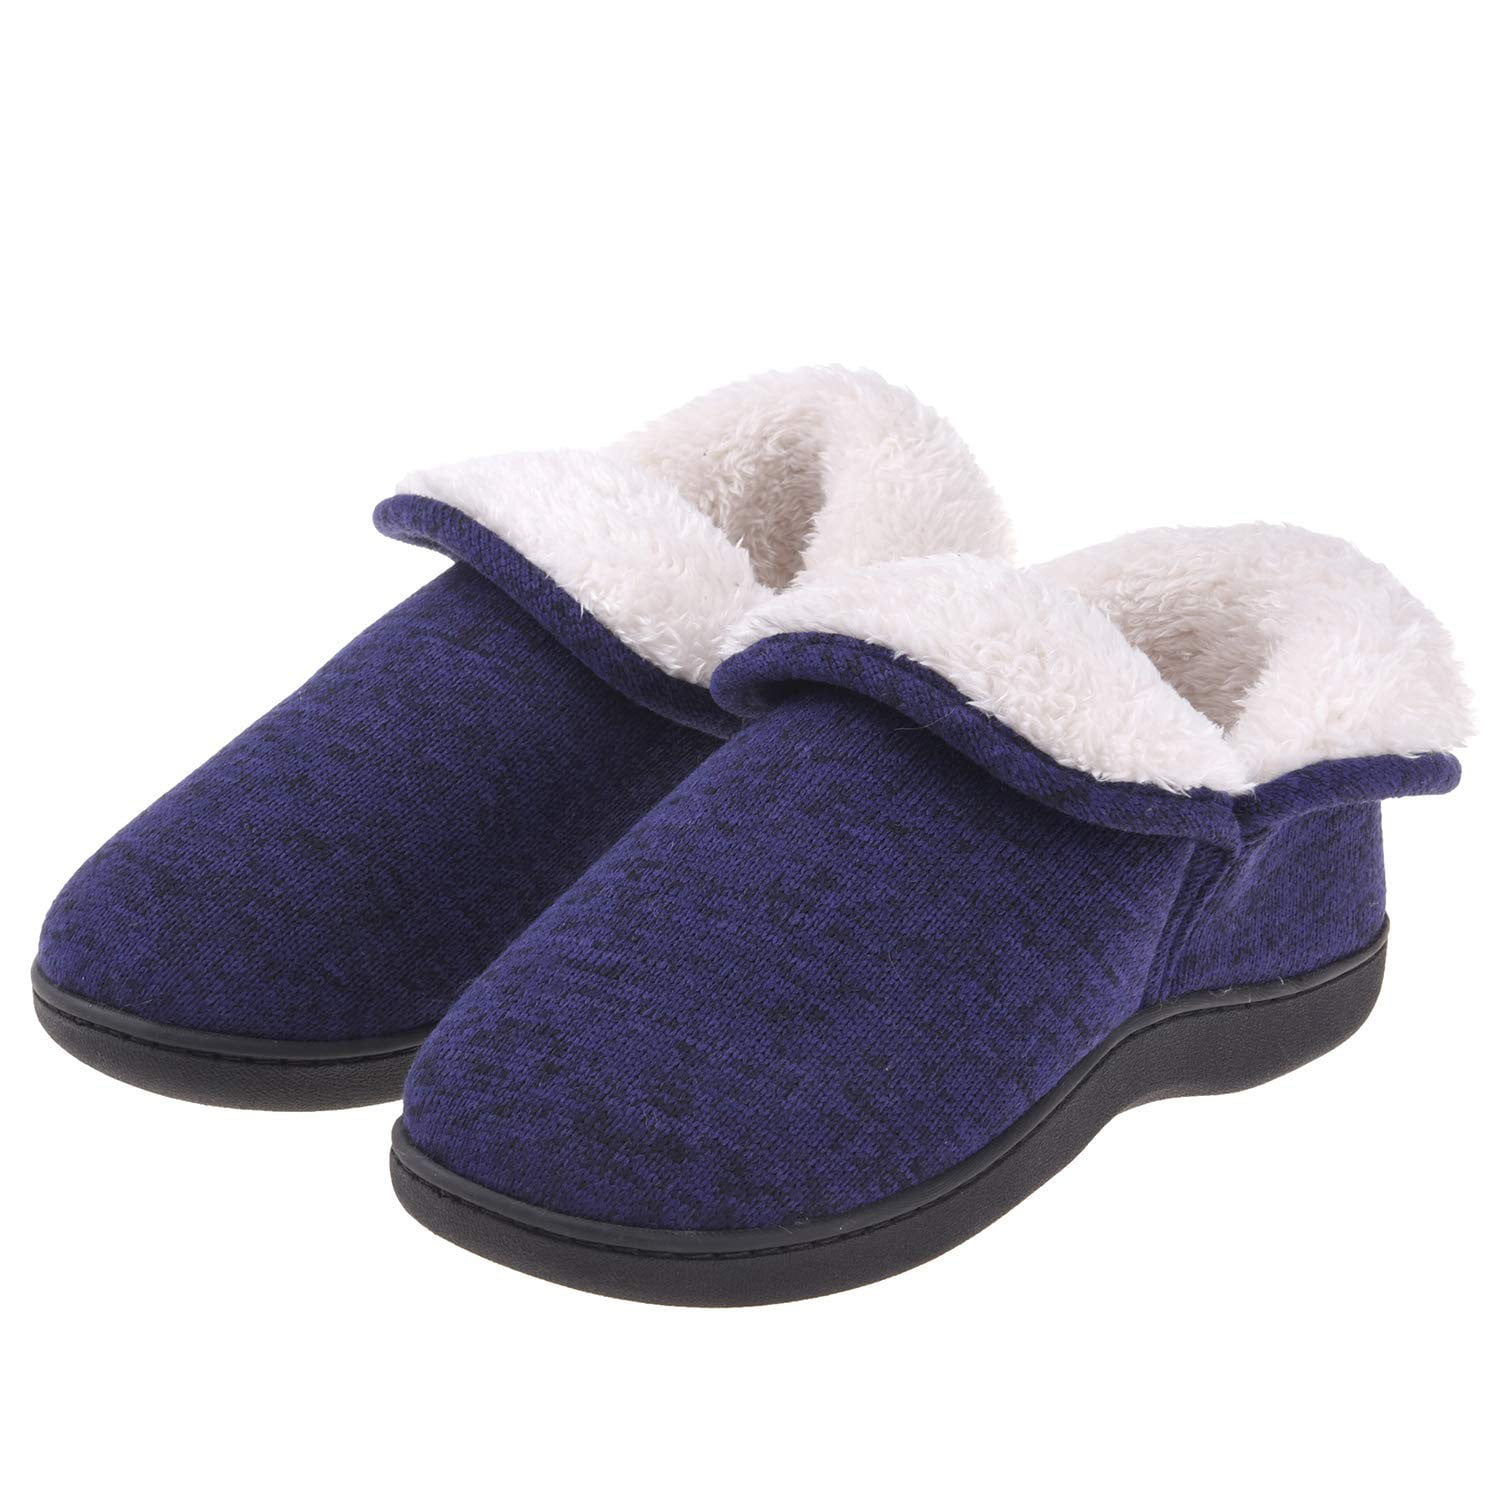 VONMAY - Women's Fuzzy Slippers Boots Memory Foam Booties House Shoes ...